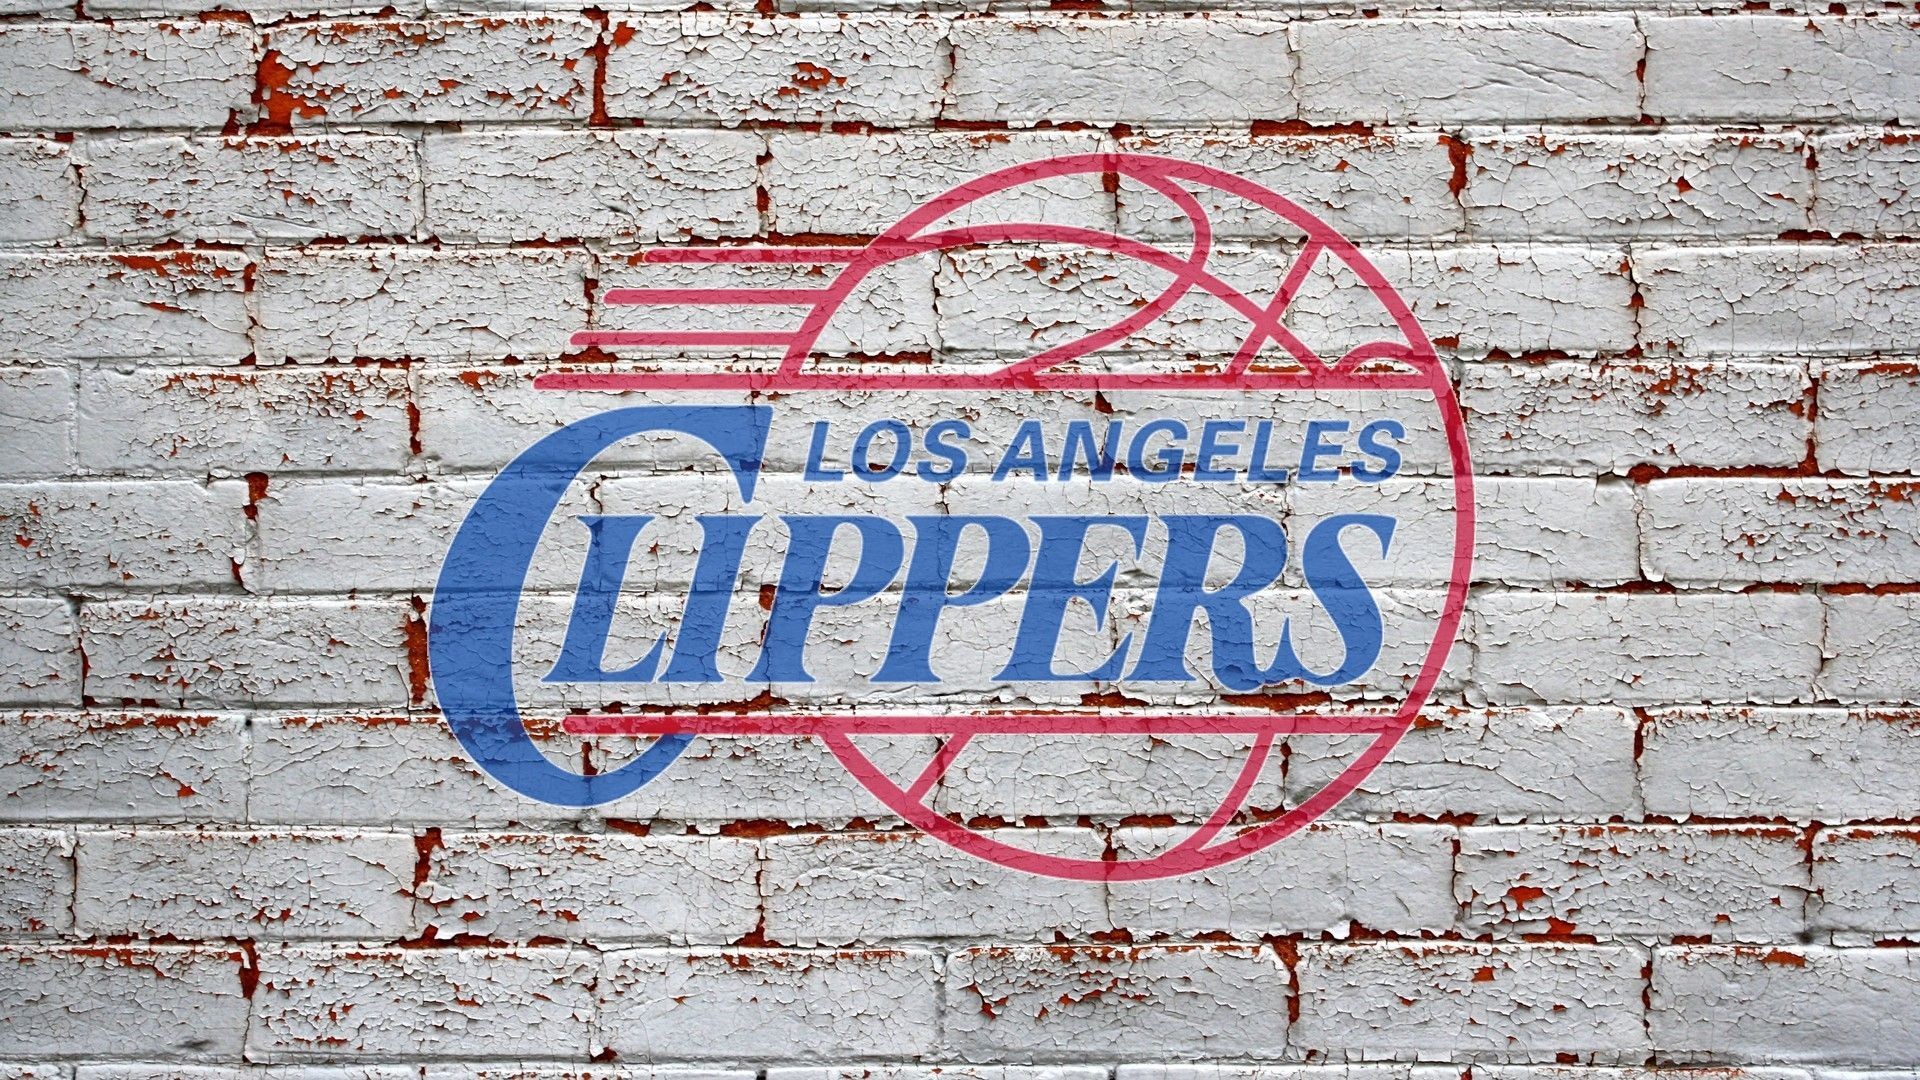 1920x1080 Clippers, Ben Dildine – free download